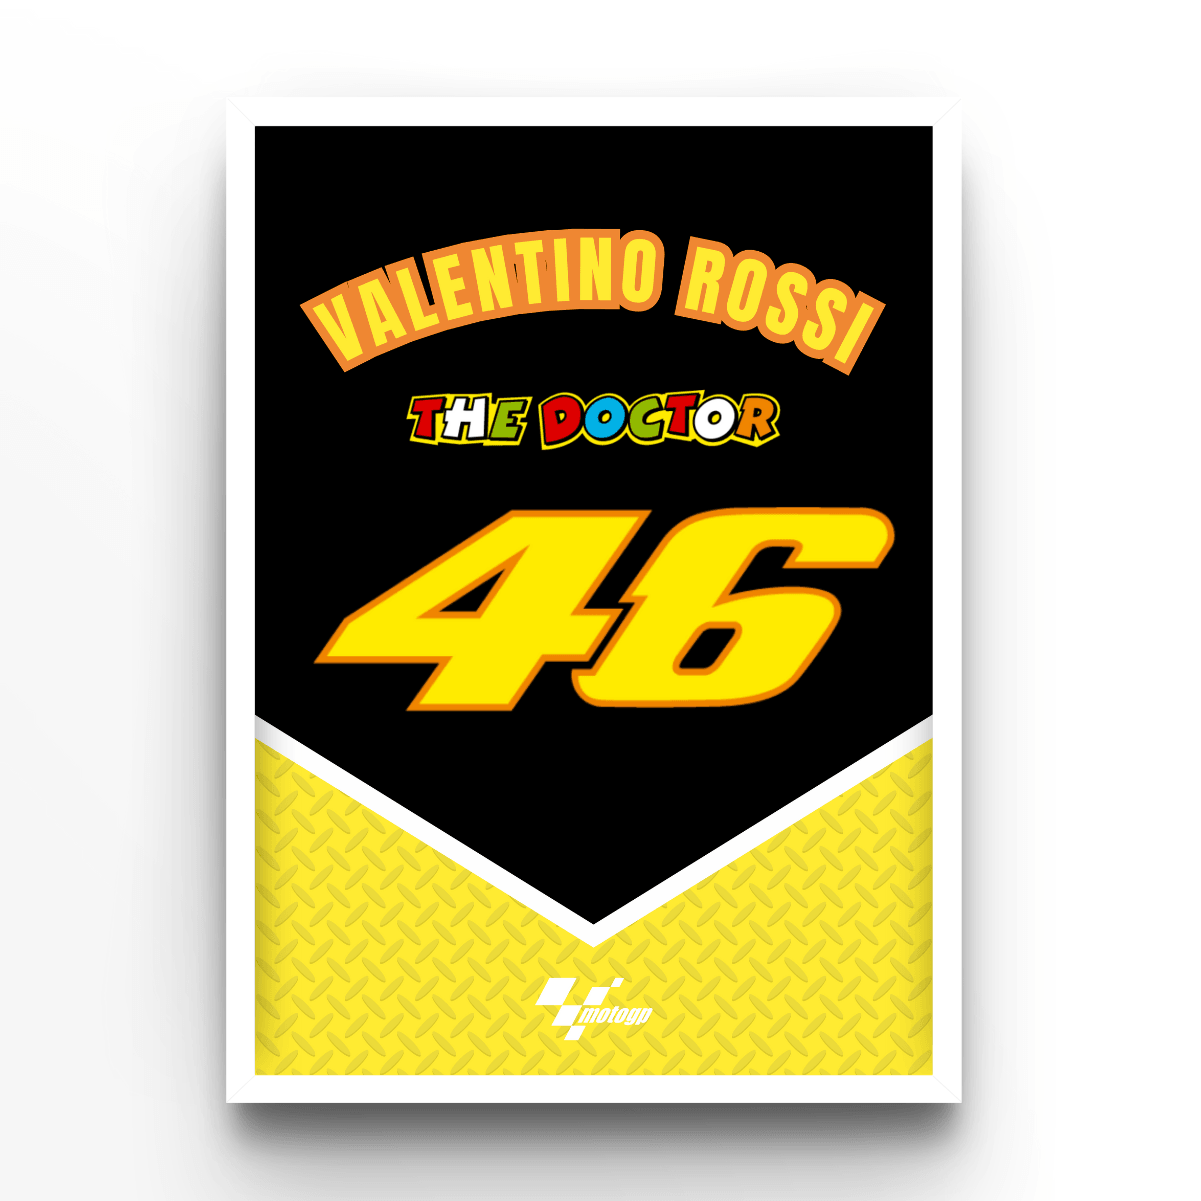 Valentino Rossi - A4, A3, A2 Posters Base - Poster Print Shop / Art Prints / PostersBase